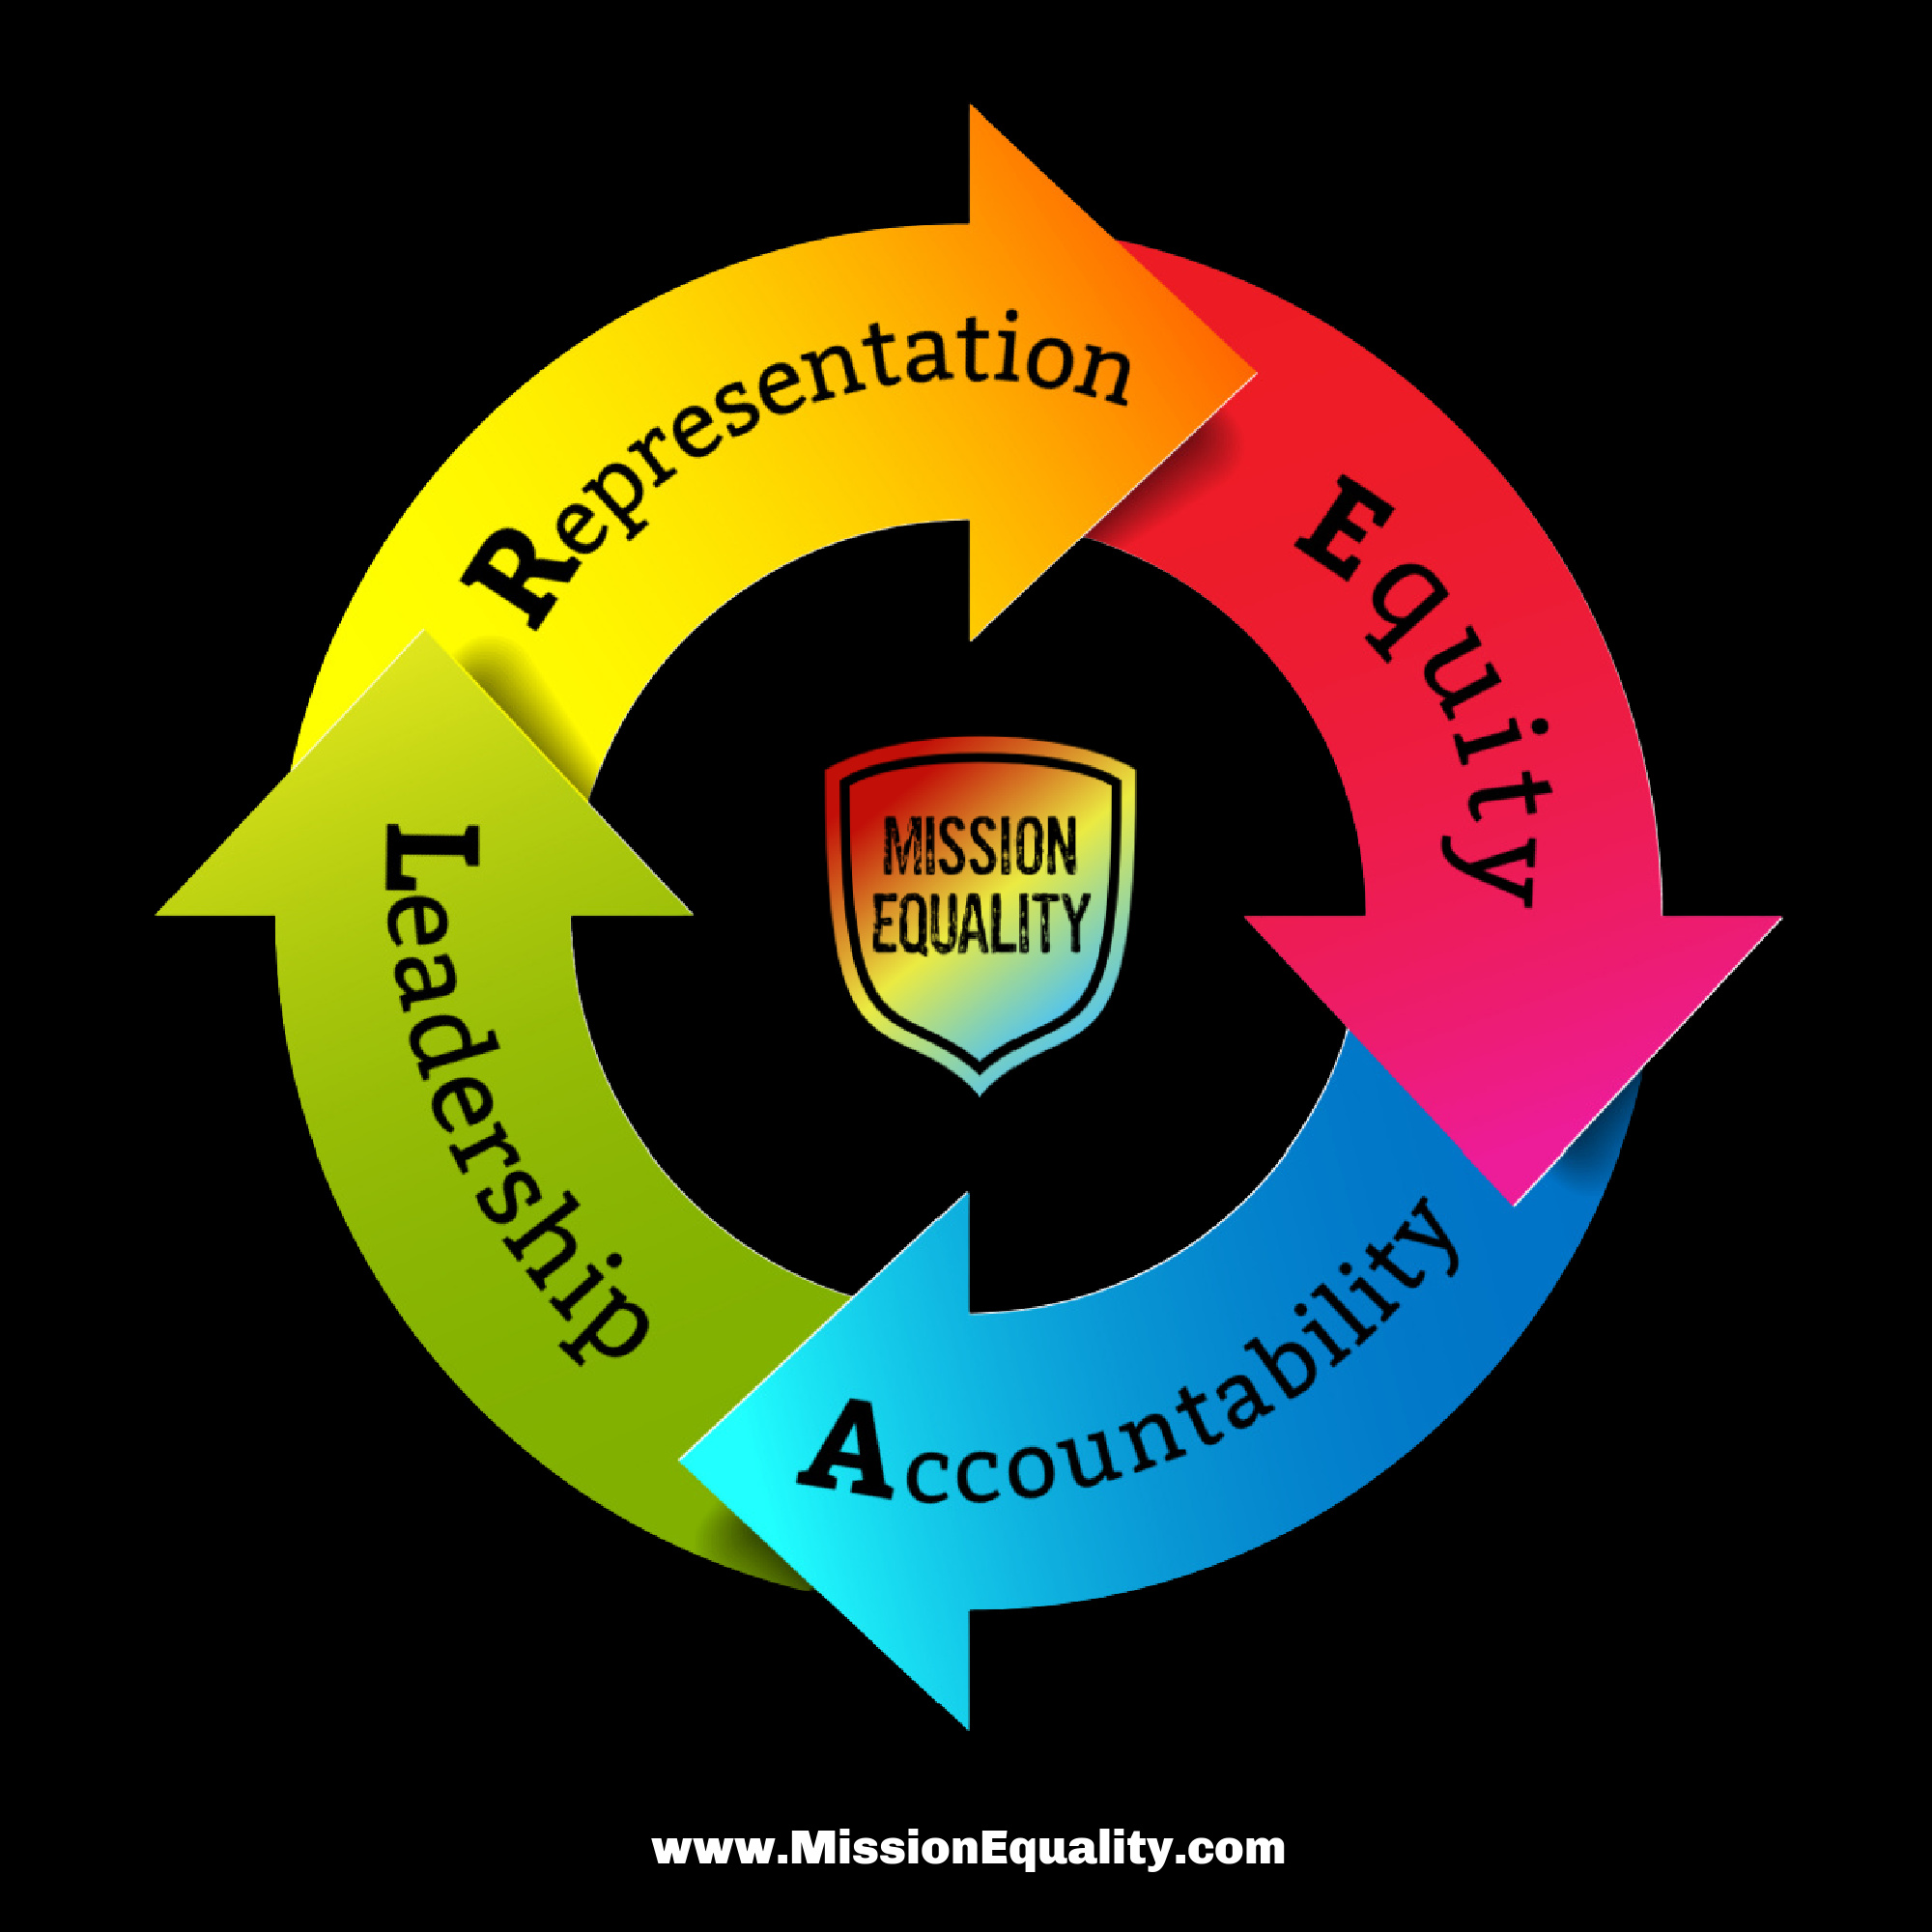 The REAL World Equality Framework: The word Representation on an orange stripe; the words Equitable & Equal Environment on a yellow stripe; the words Accountability on a green stripe; the words Leading To Equality on a blue stripe.